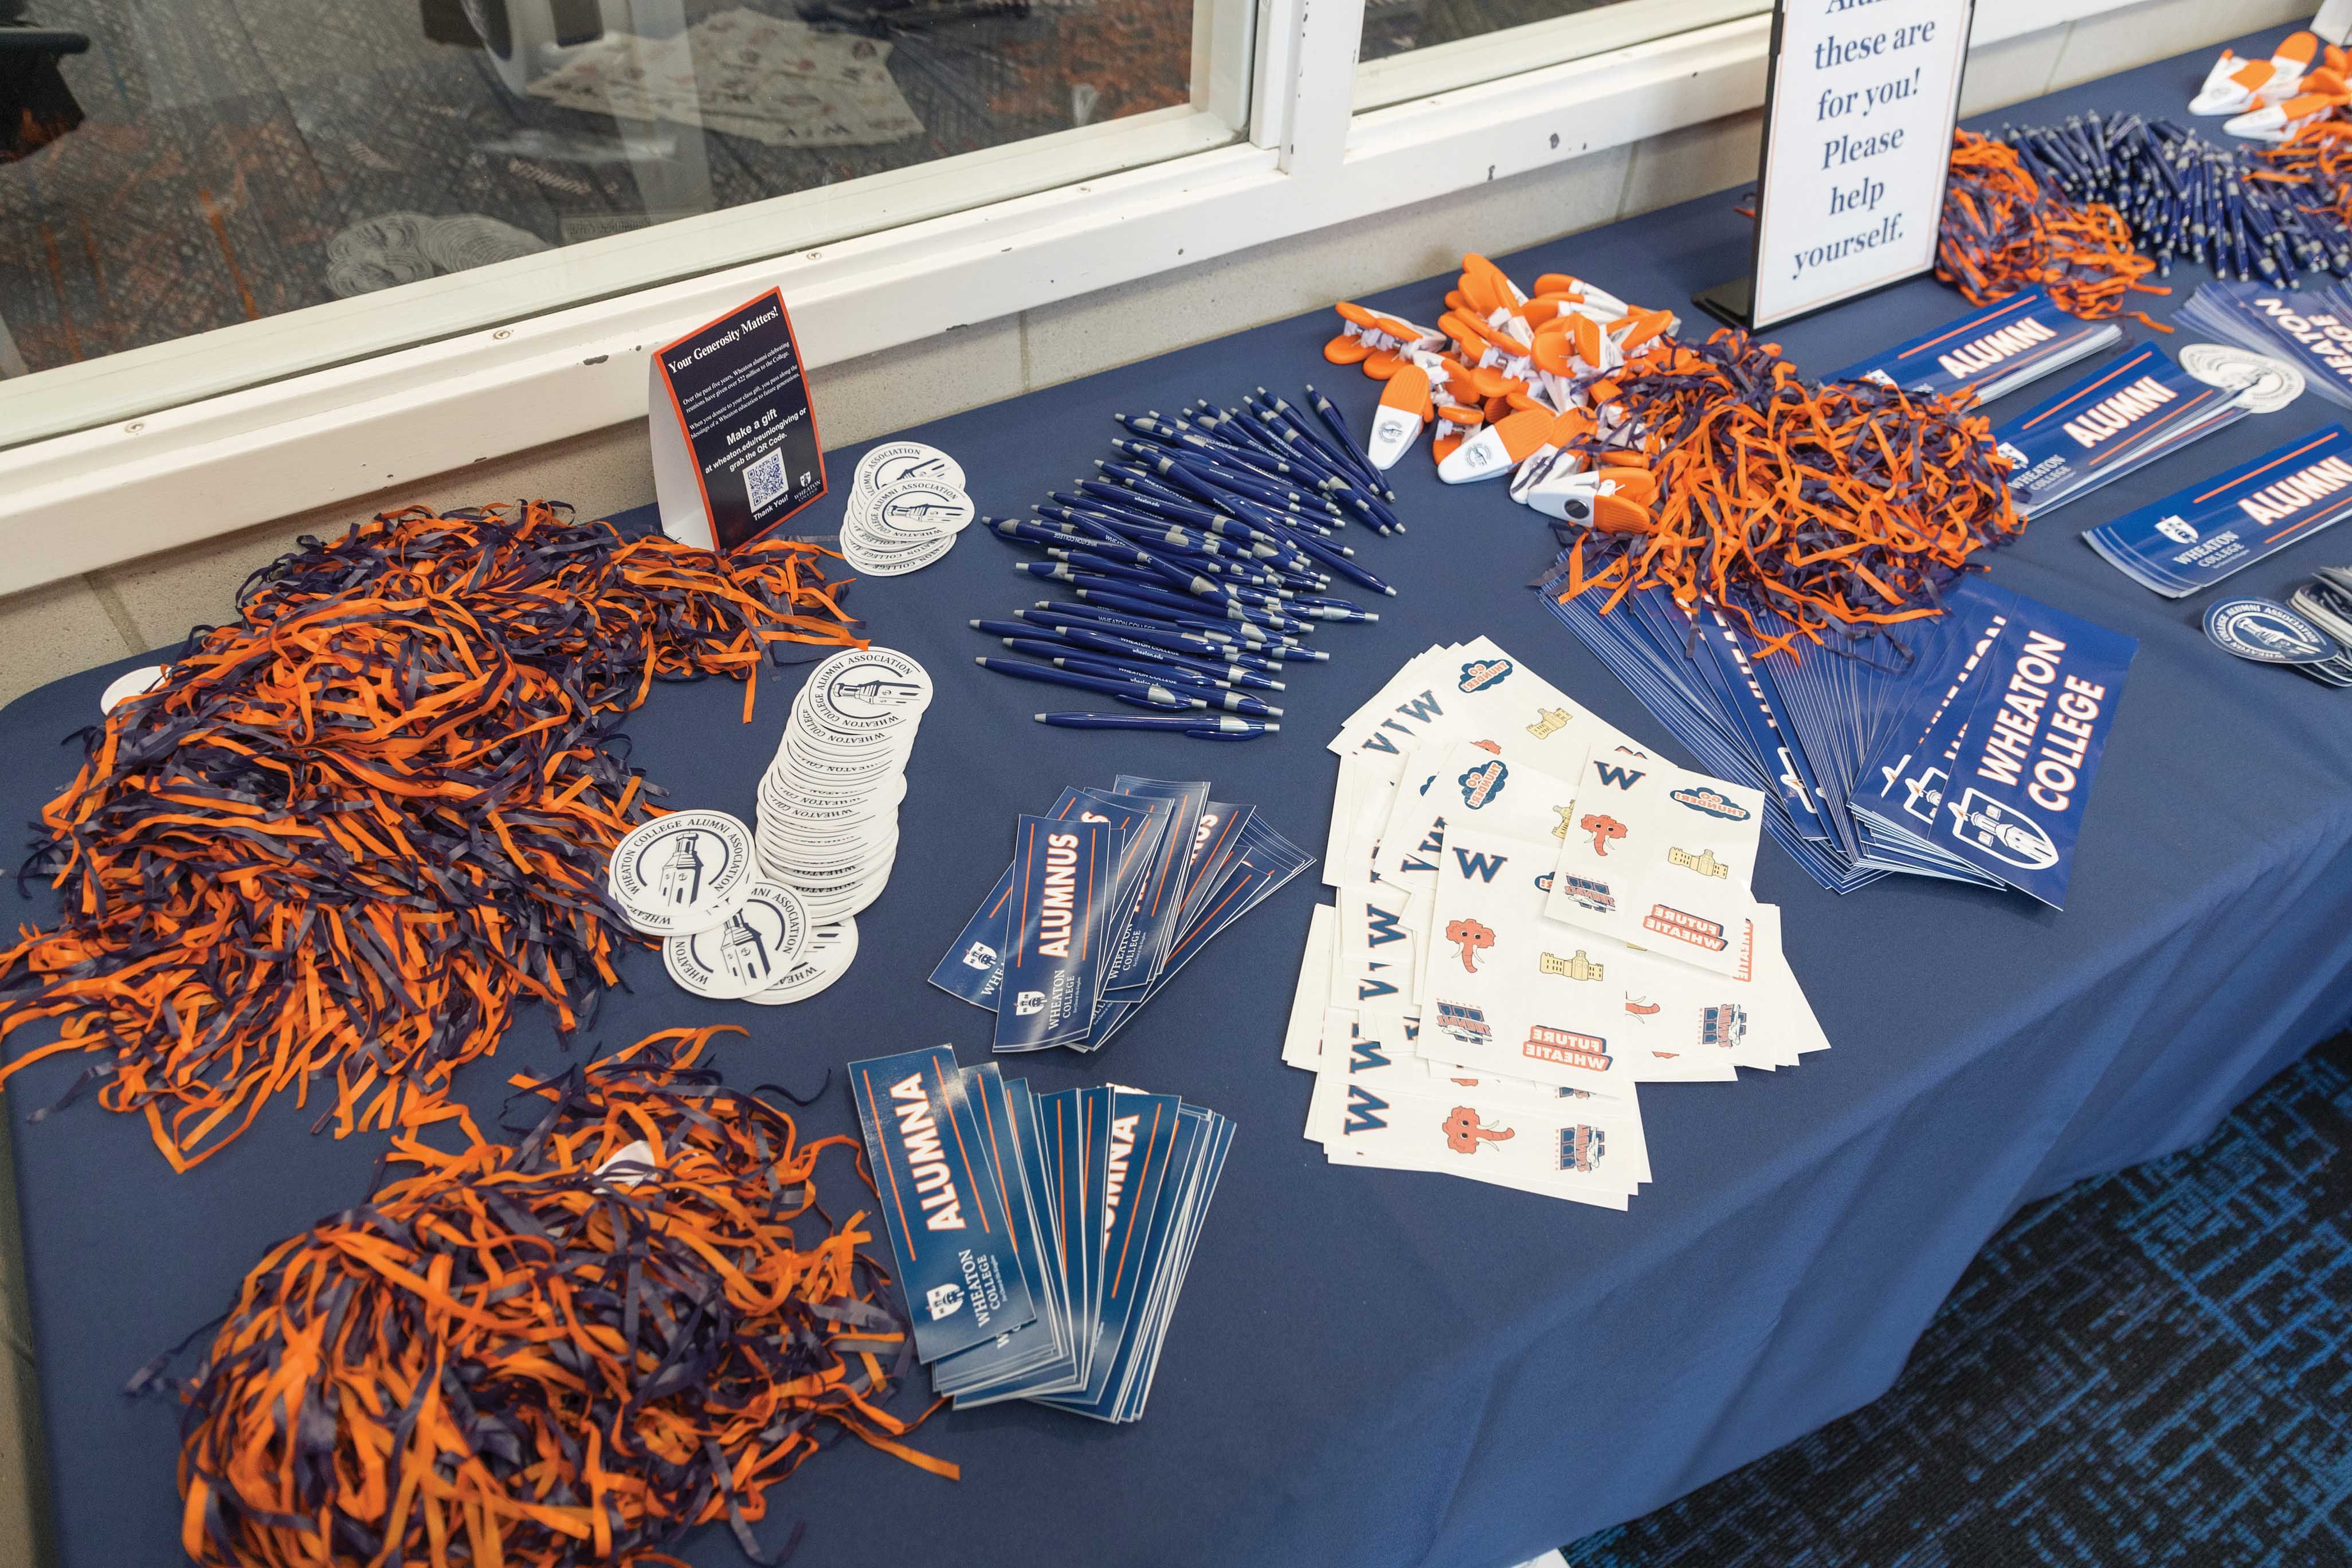 Free stickers, pens, books, and other memorabilia for Homecoming attendees.